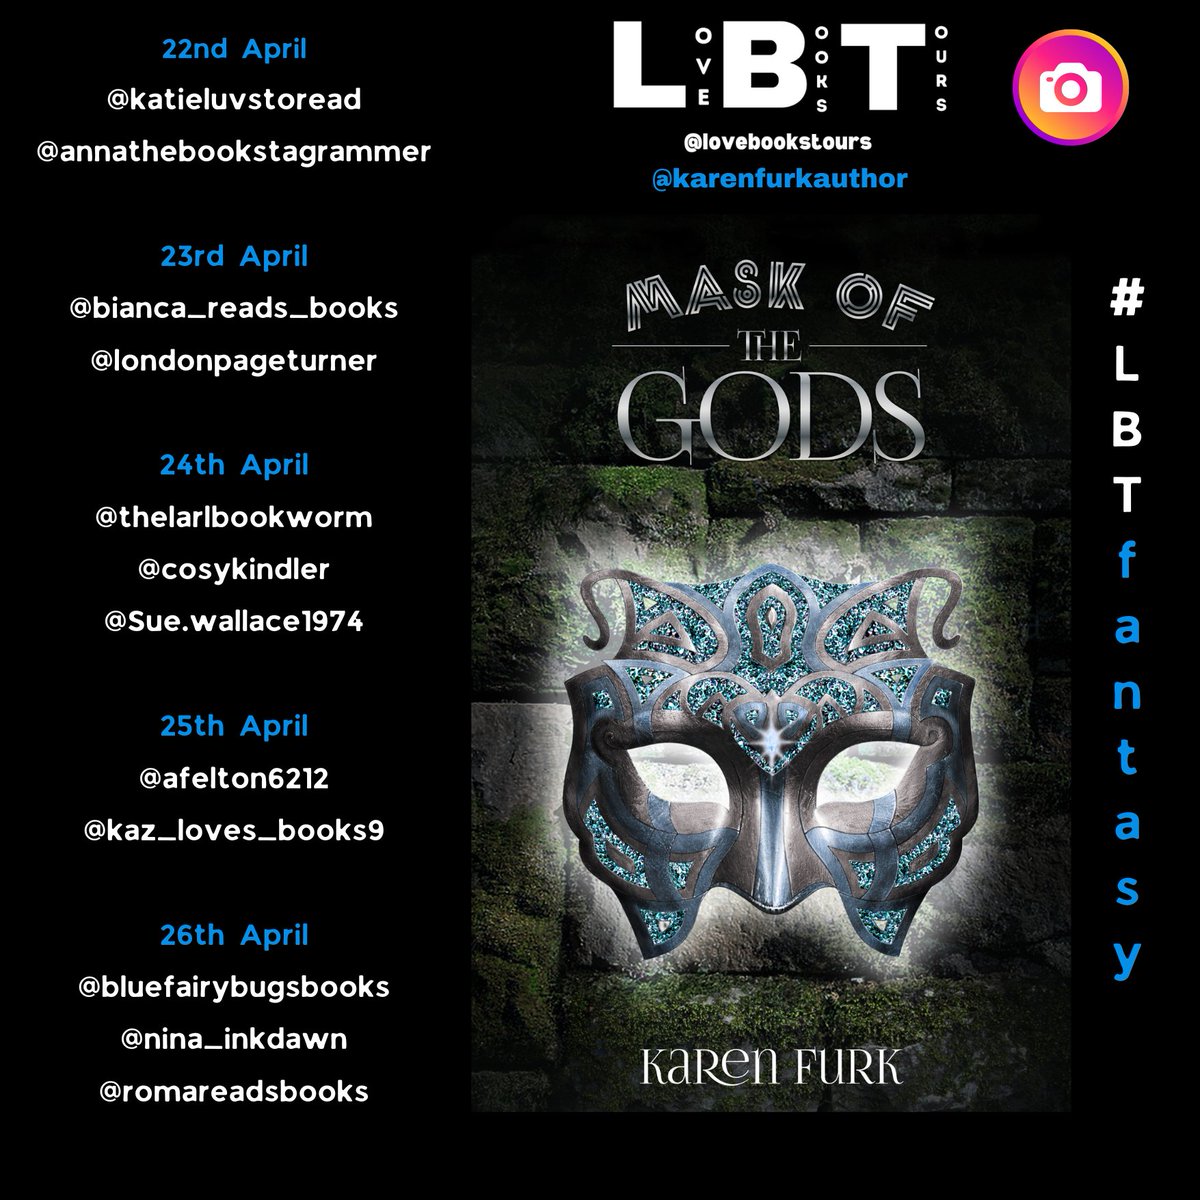 COMING SOON - #Virtualbooktour |Mask of the Gods by Karen Furk| Proudly organised by @lovebookstours #BookTour #LBTCrew #Bookreviews #Authorservices #Bookblogtours kellylacey.com/2024/04/20/com… via @KellyALacey